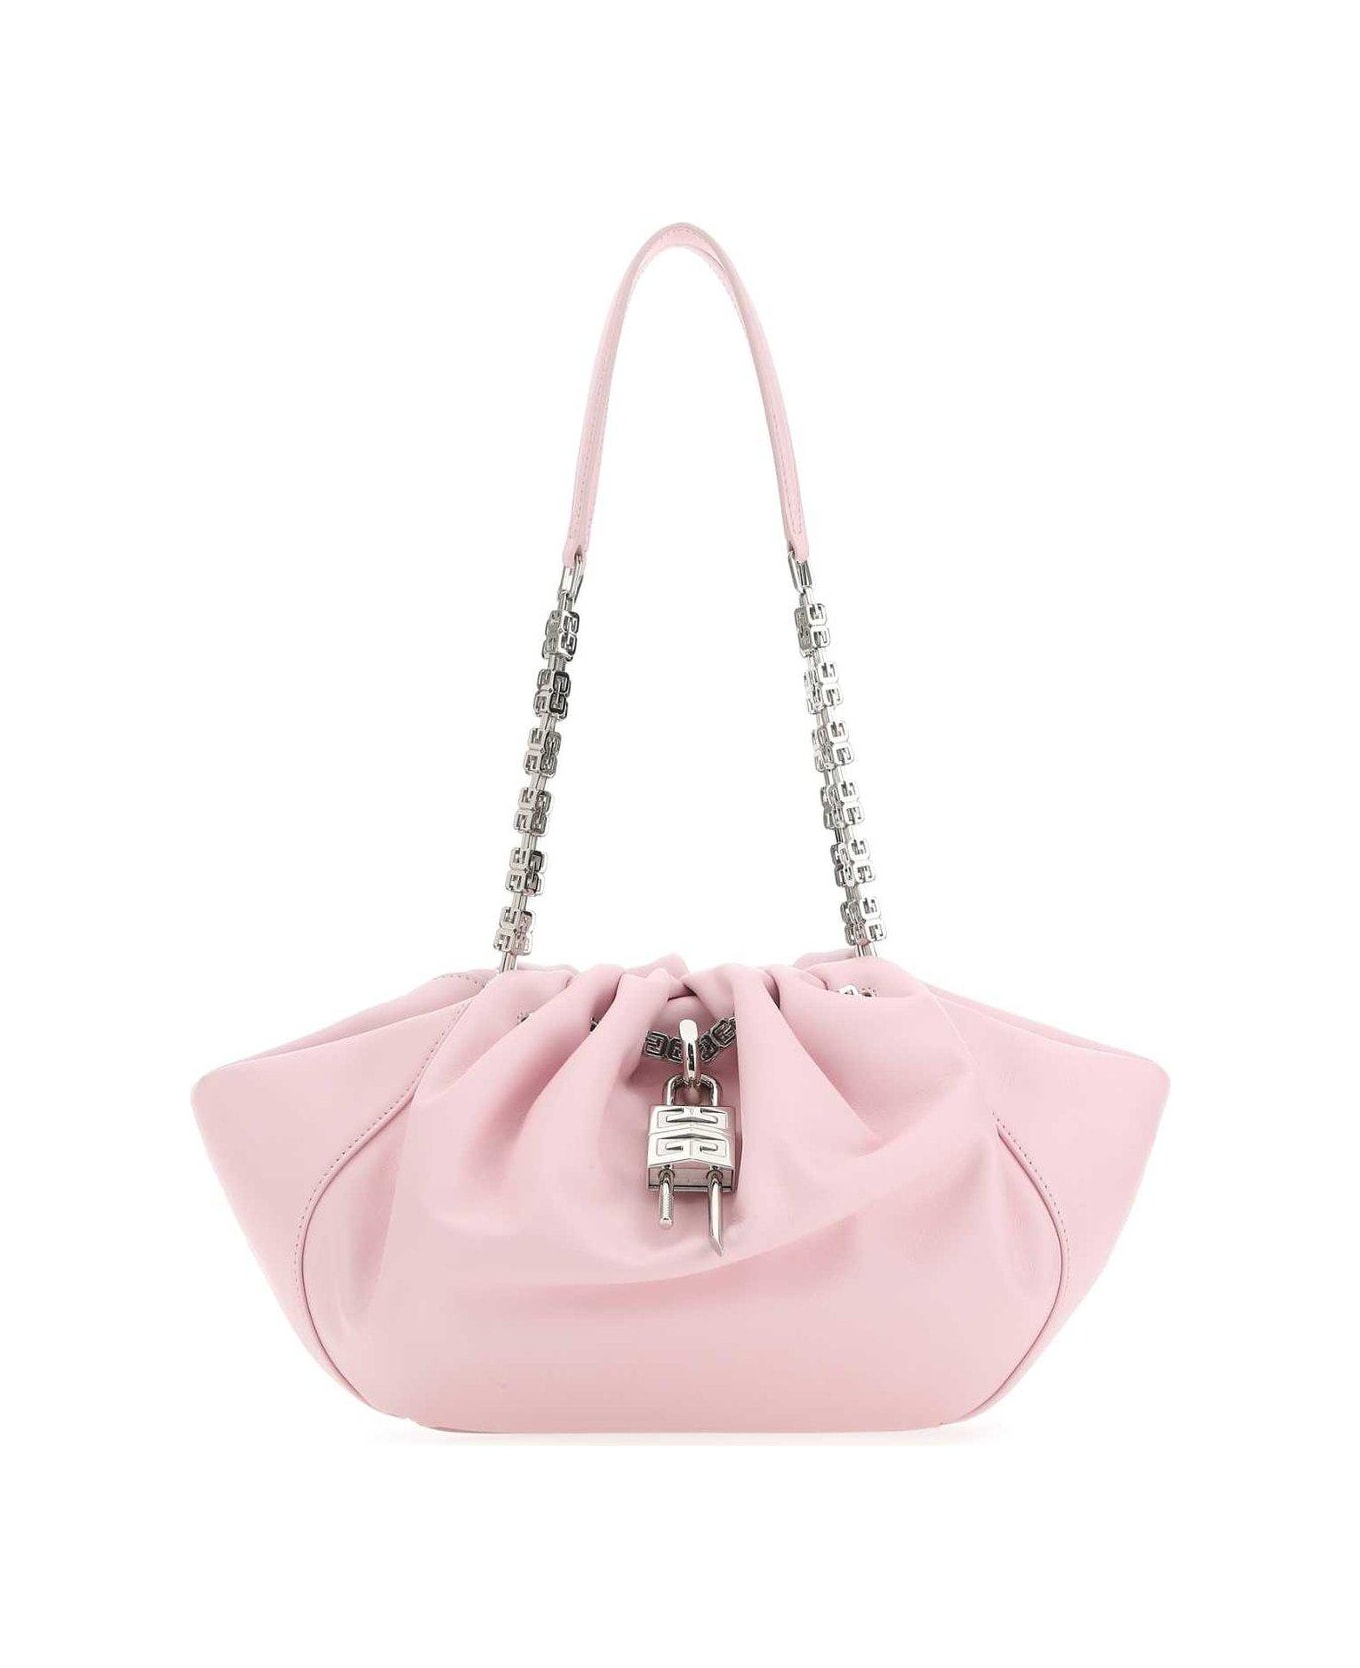 Givenchy Small Kenny Bag | italist